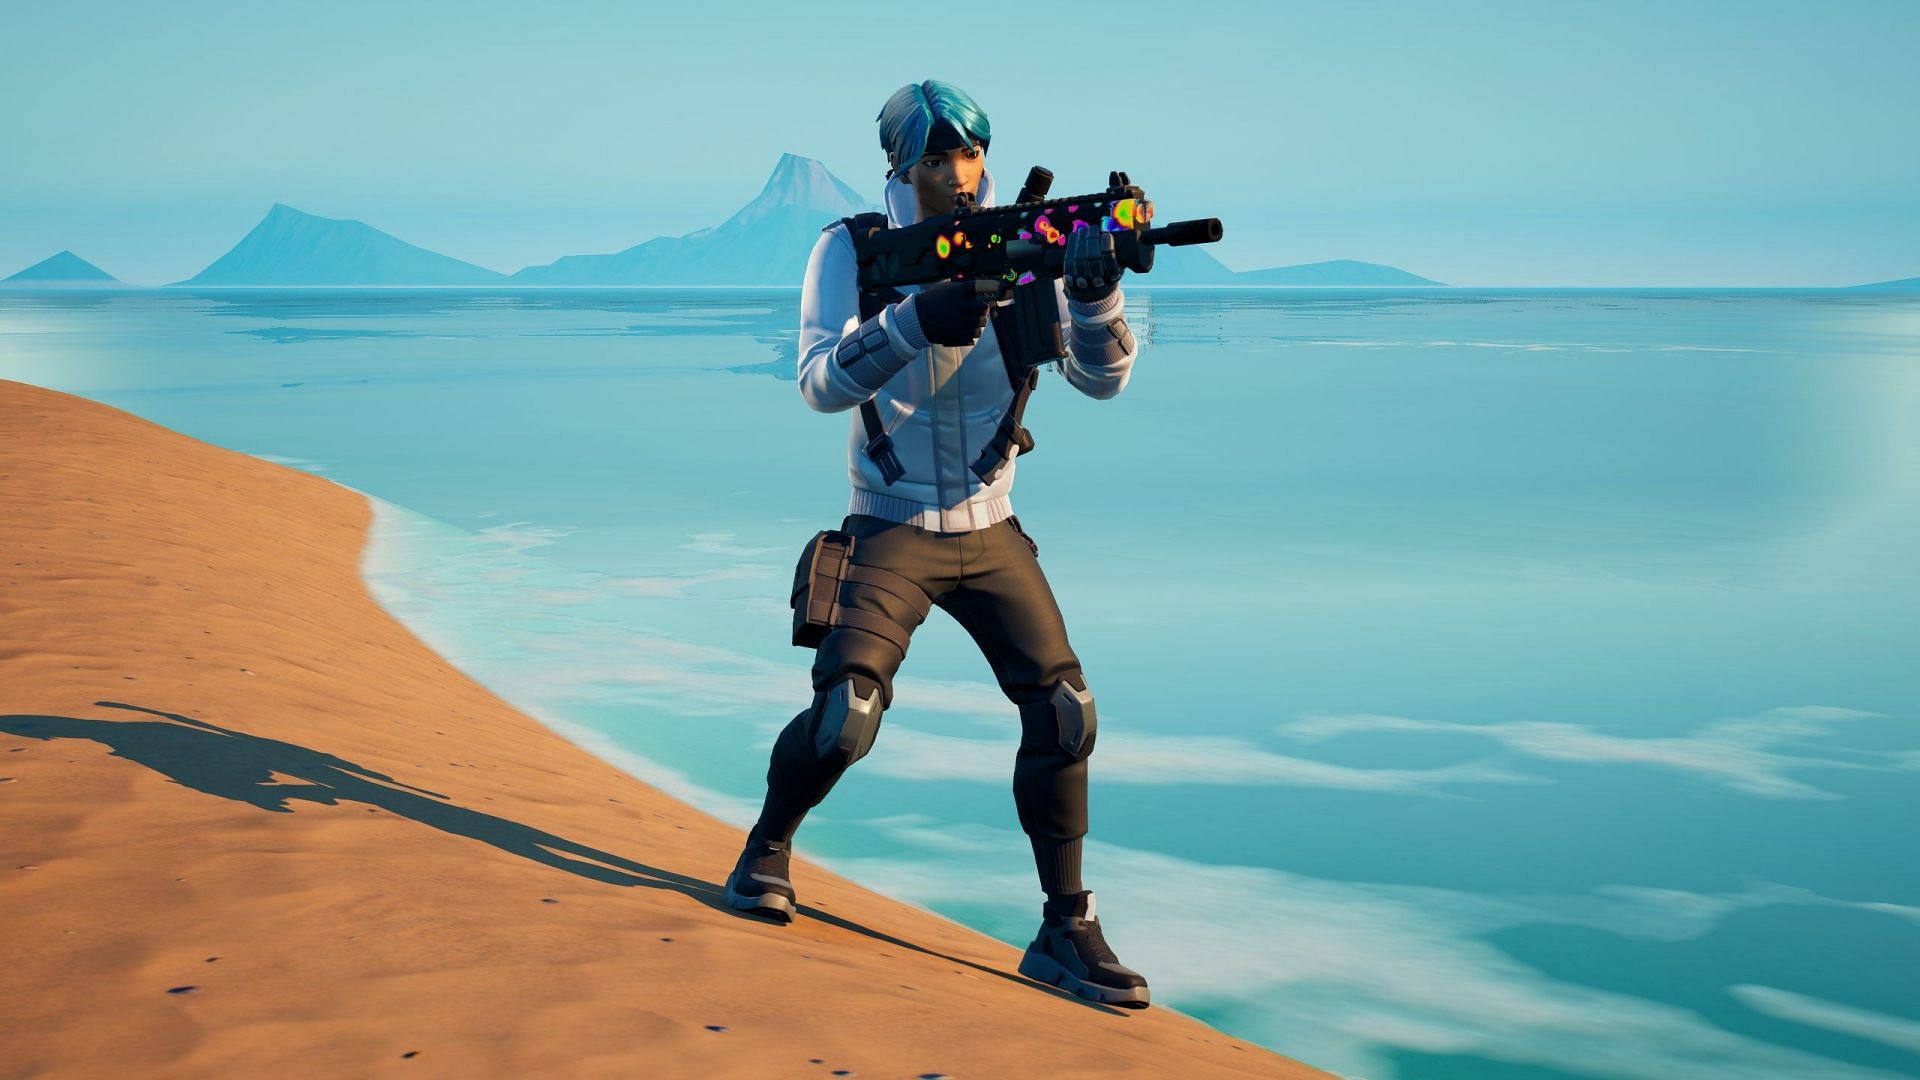 Fortnite: Can PC players redeem the free PlayStation Plus skin?